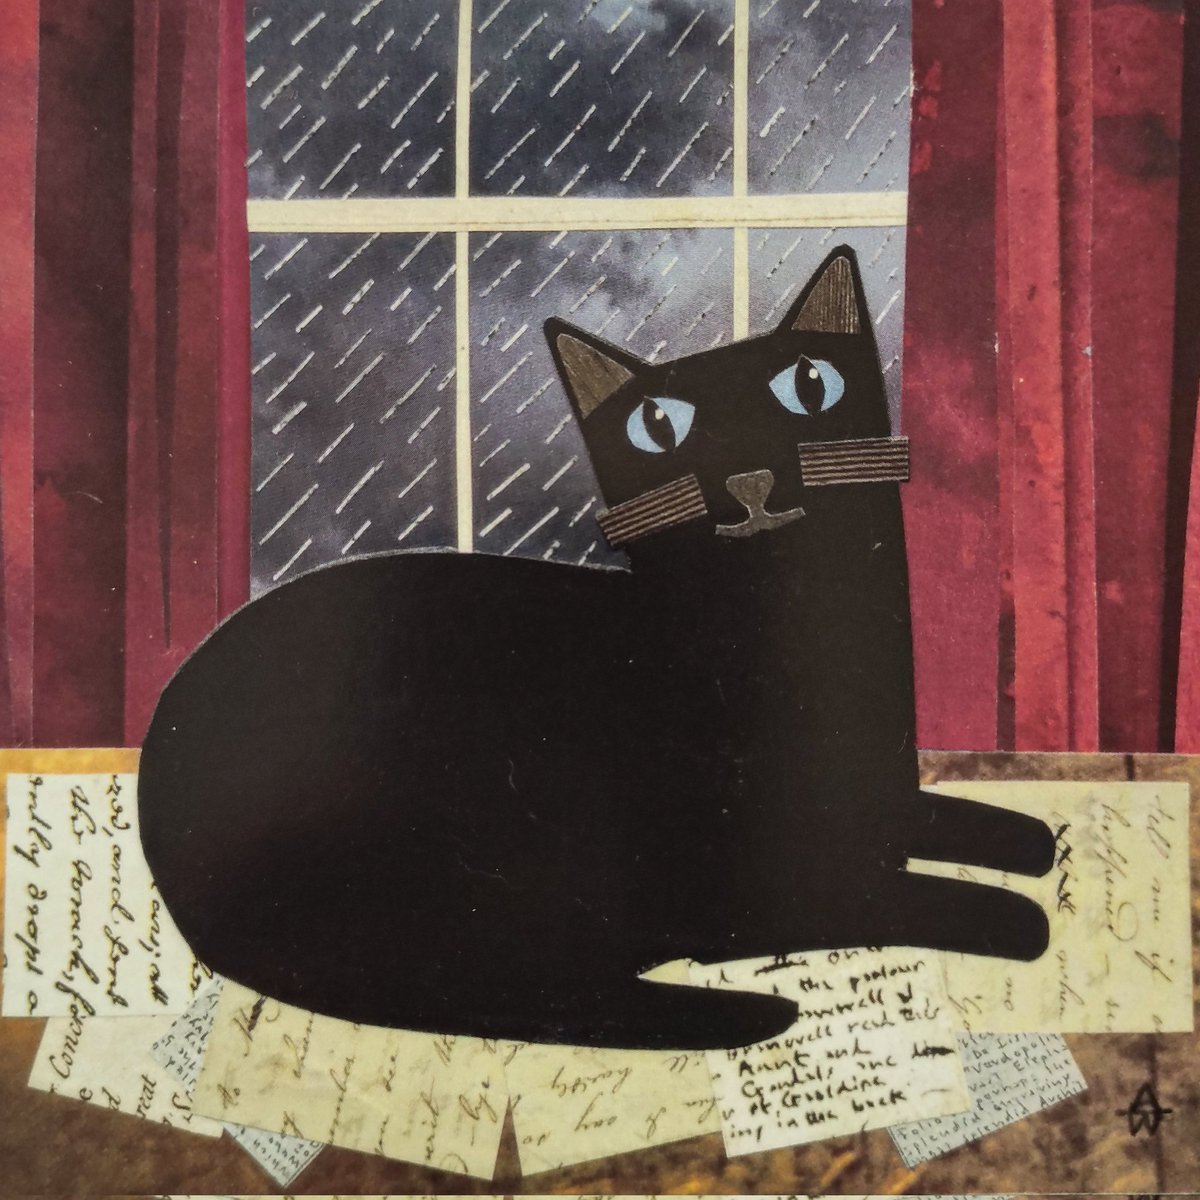 For #Caturday ...
Black Tom, the Bronte family cat.
(Cut paper collage)
Cards out of stock, but back in my shop soon.
amandawhitedesign.etsy.com
#BlackCat #Brontesisters #Greetingcard #etsystore #etsy